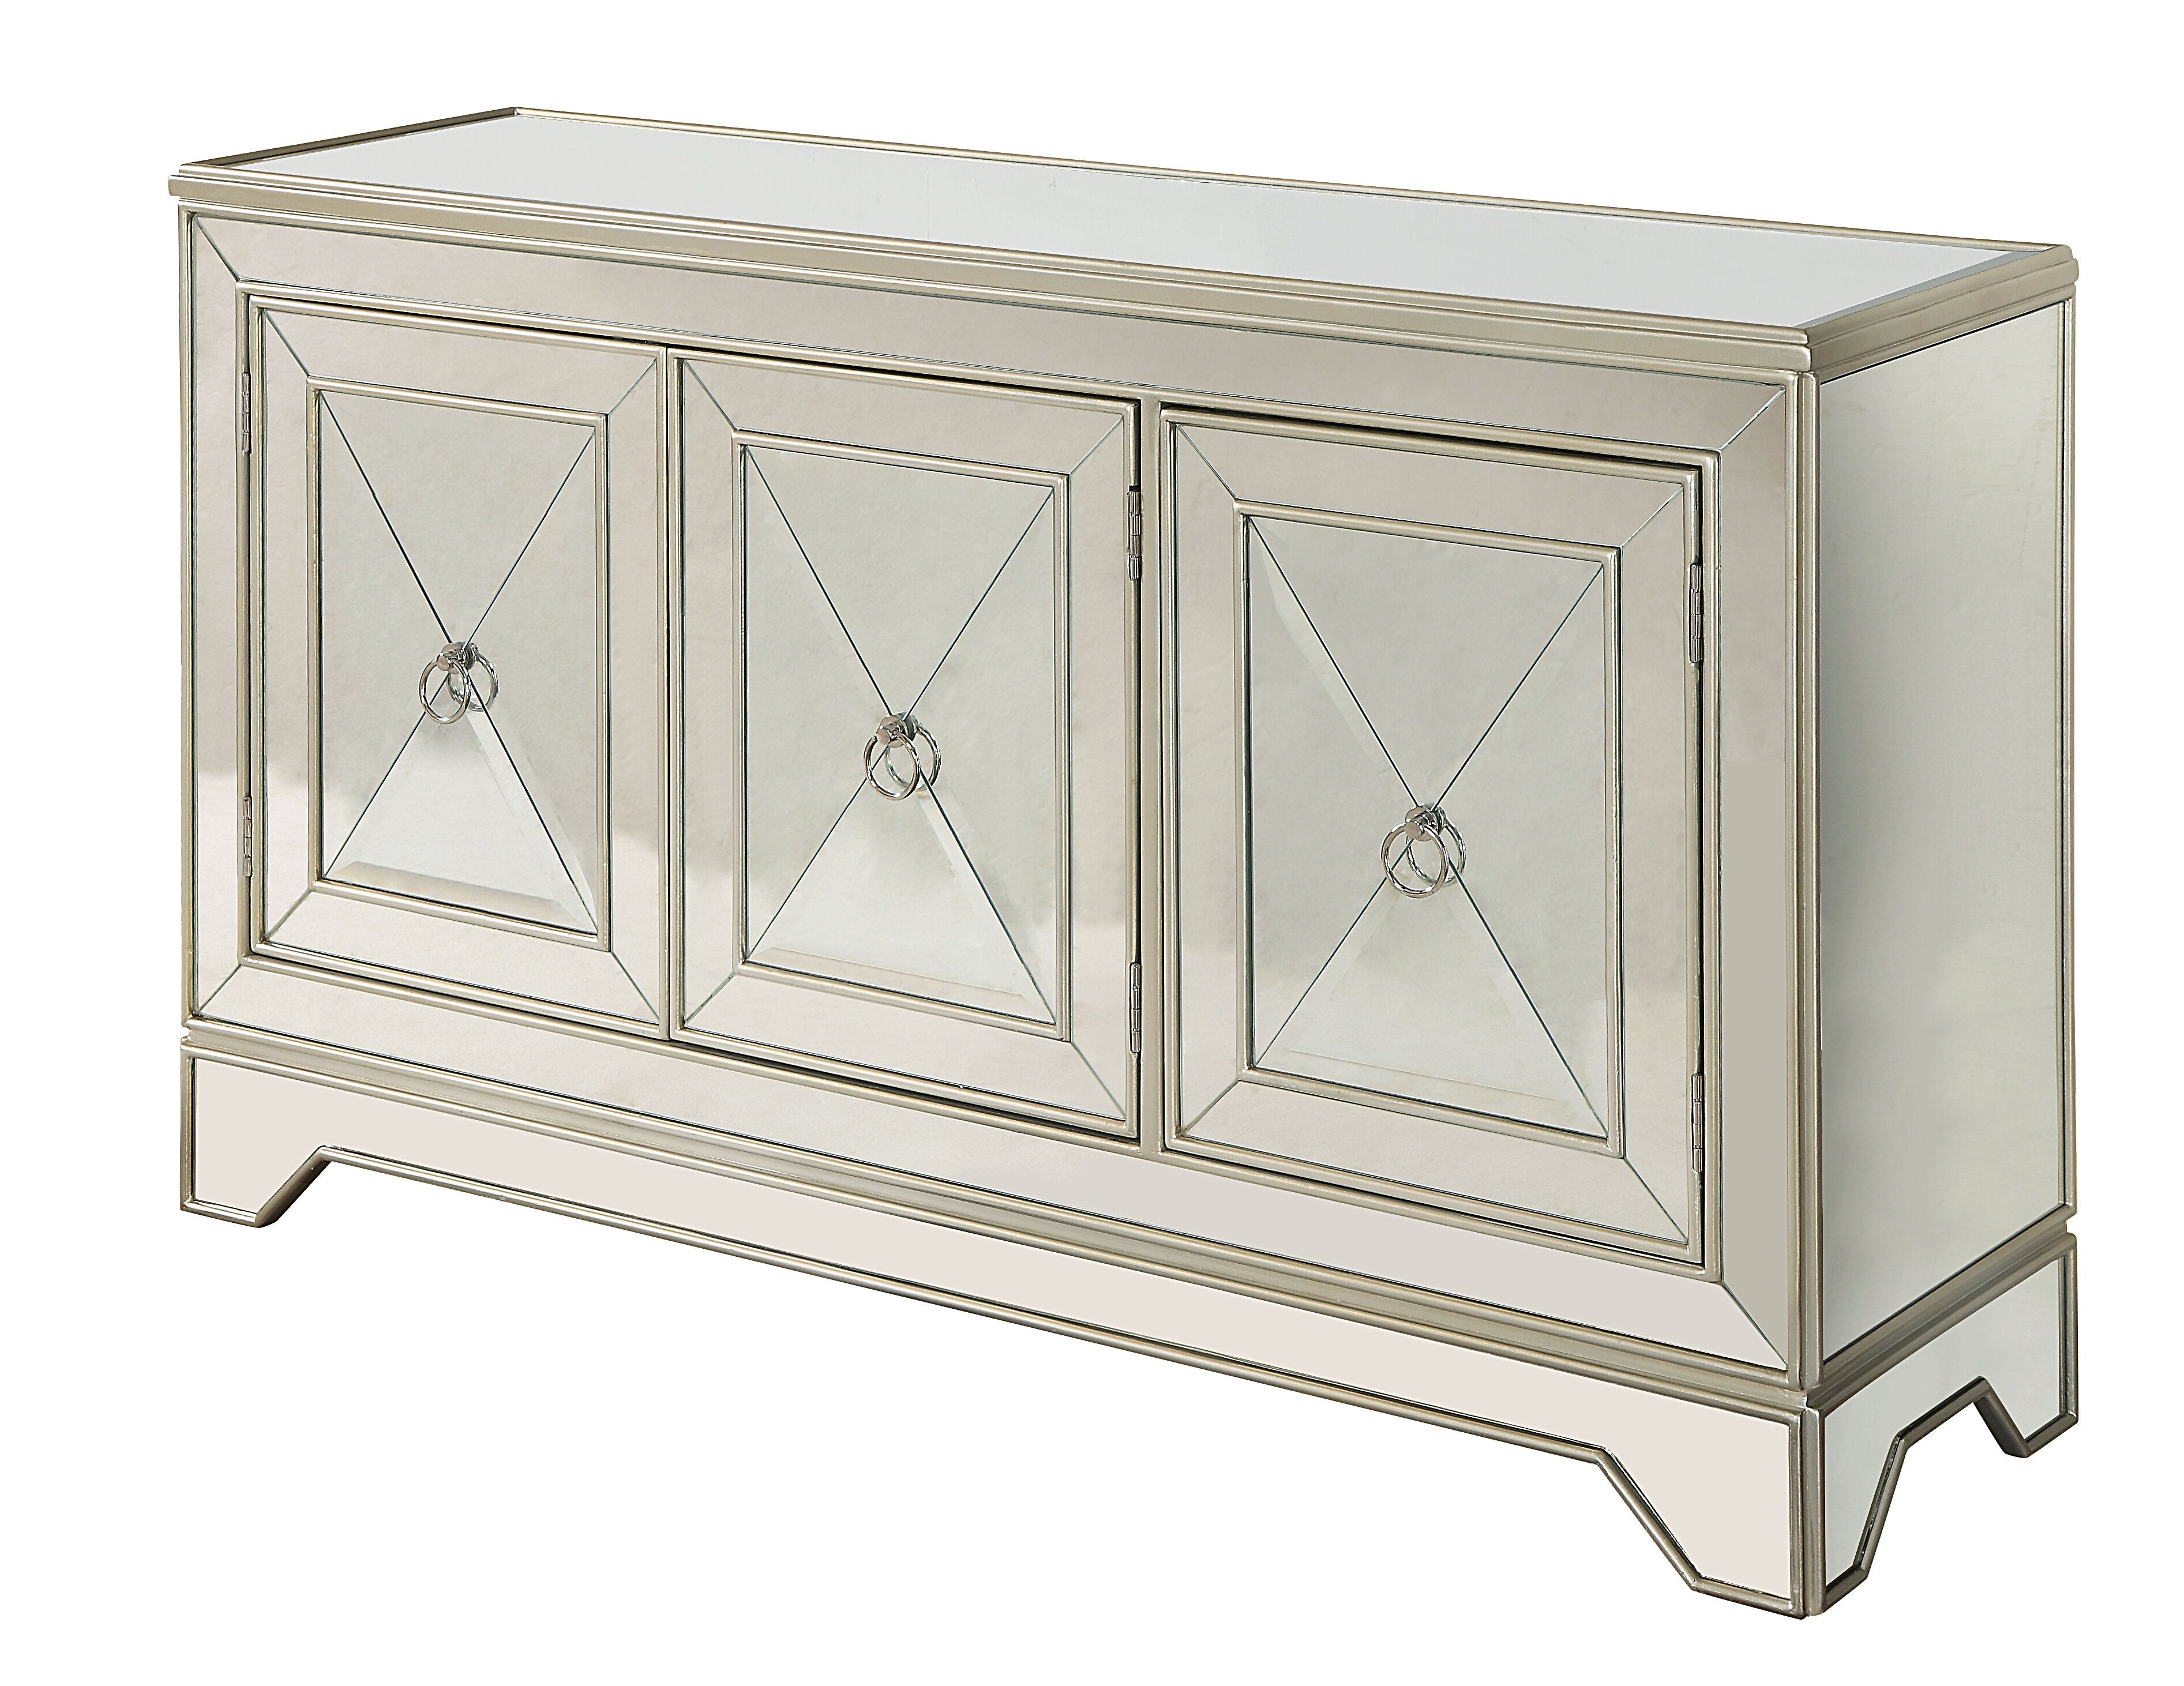 Keeney Sideboard & Reviews | Joss & Main For Casolino Sideboards (View 13 of 30)